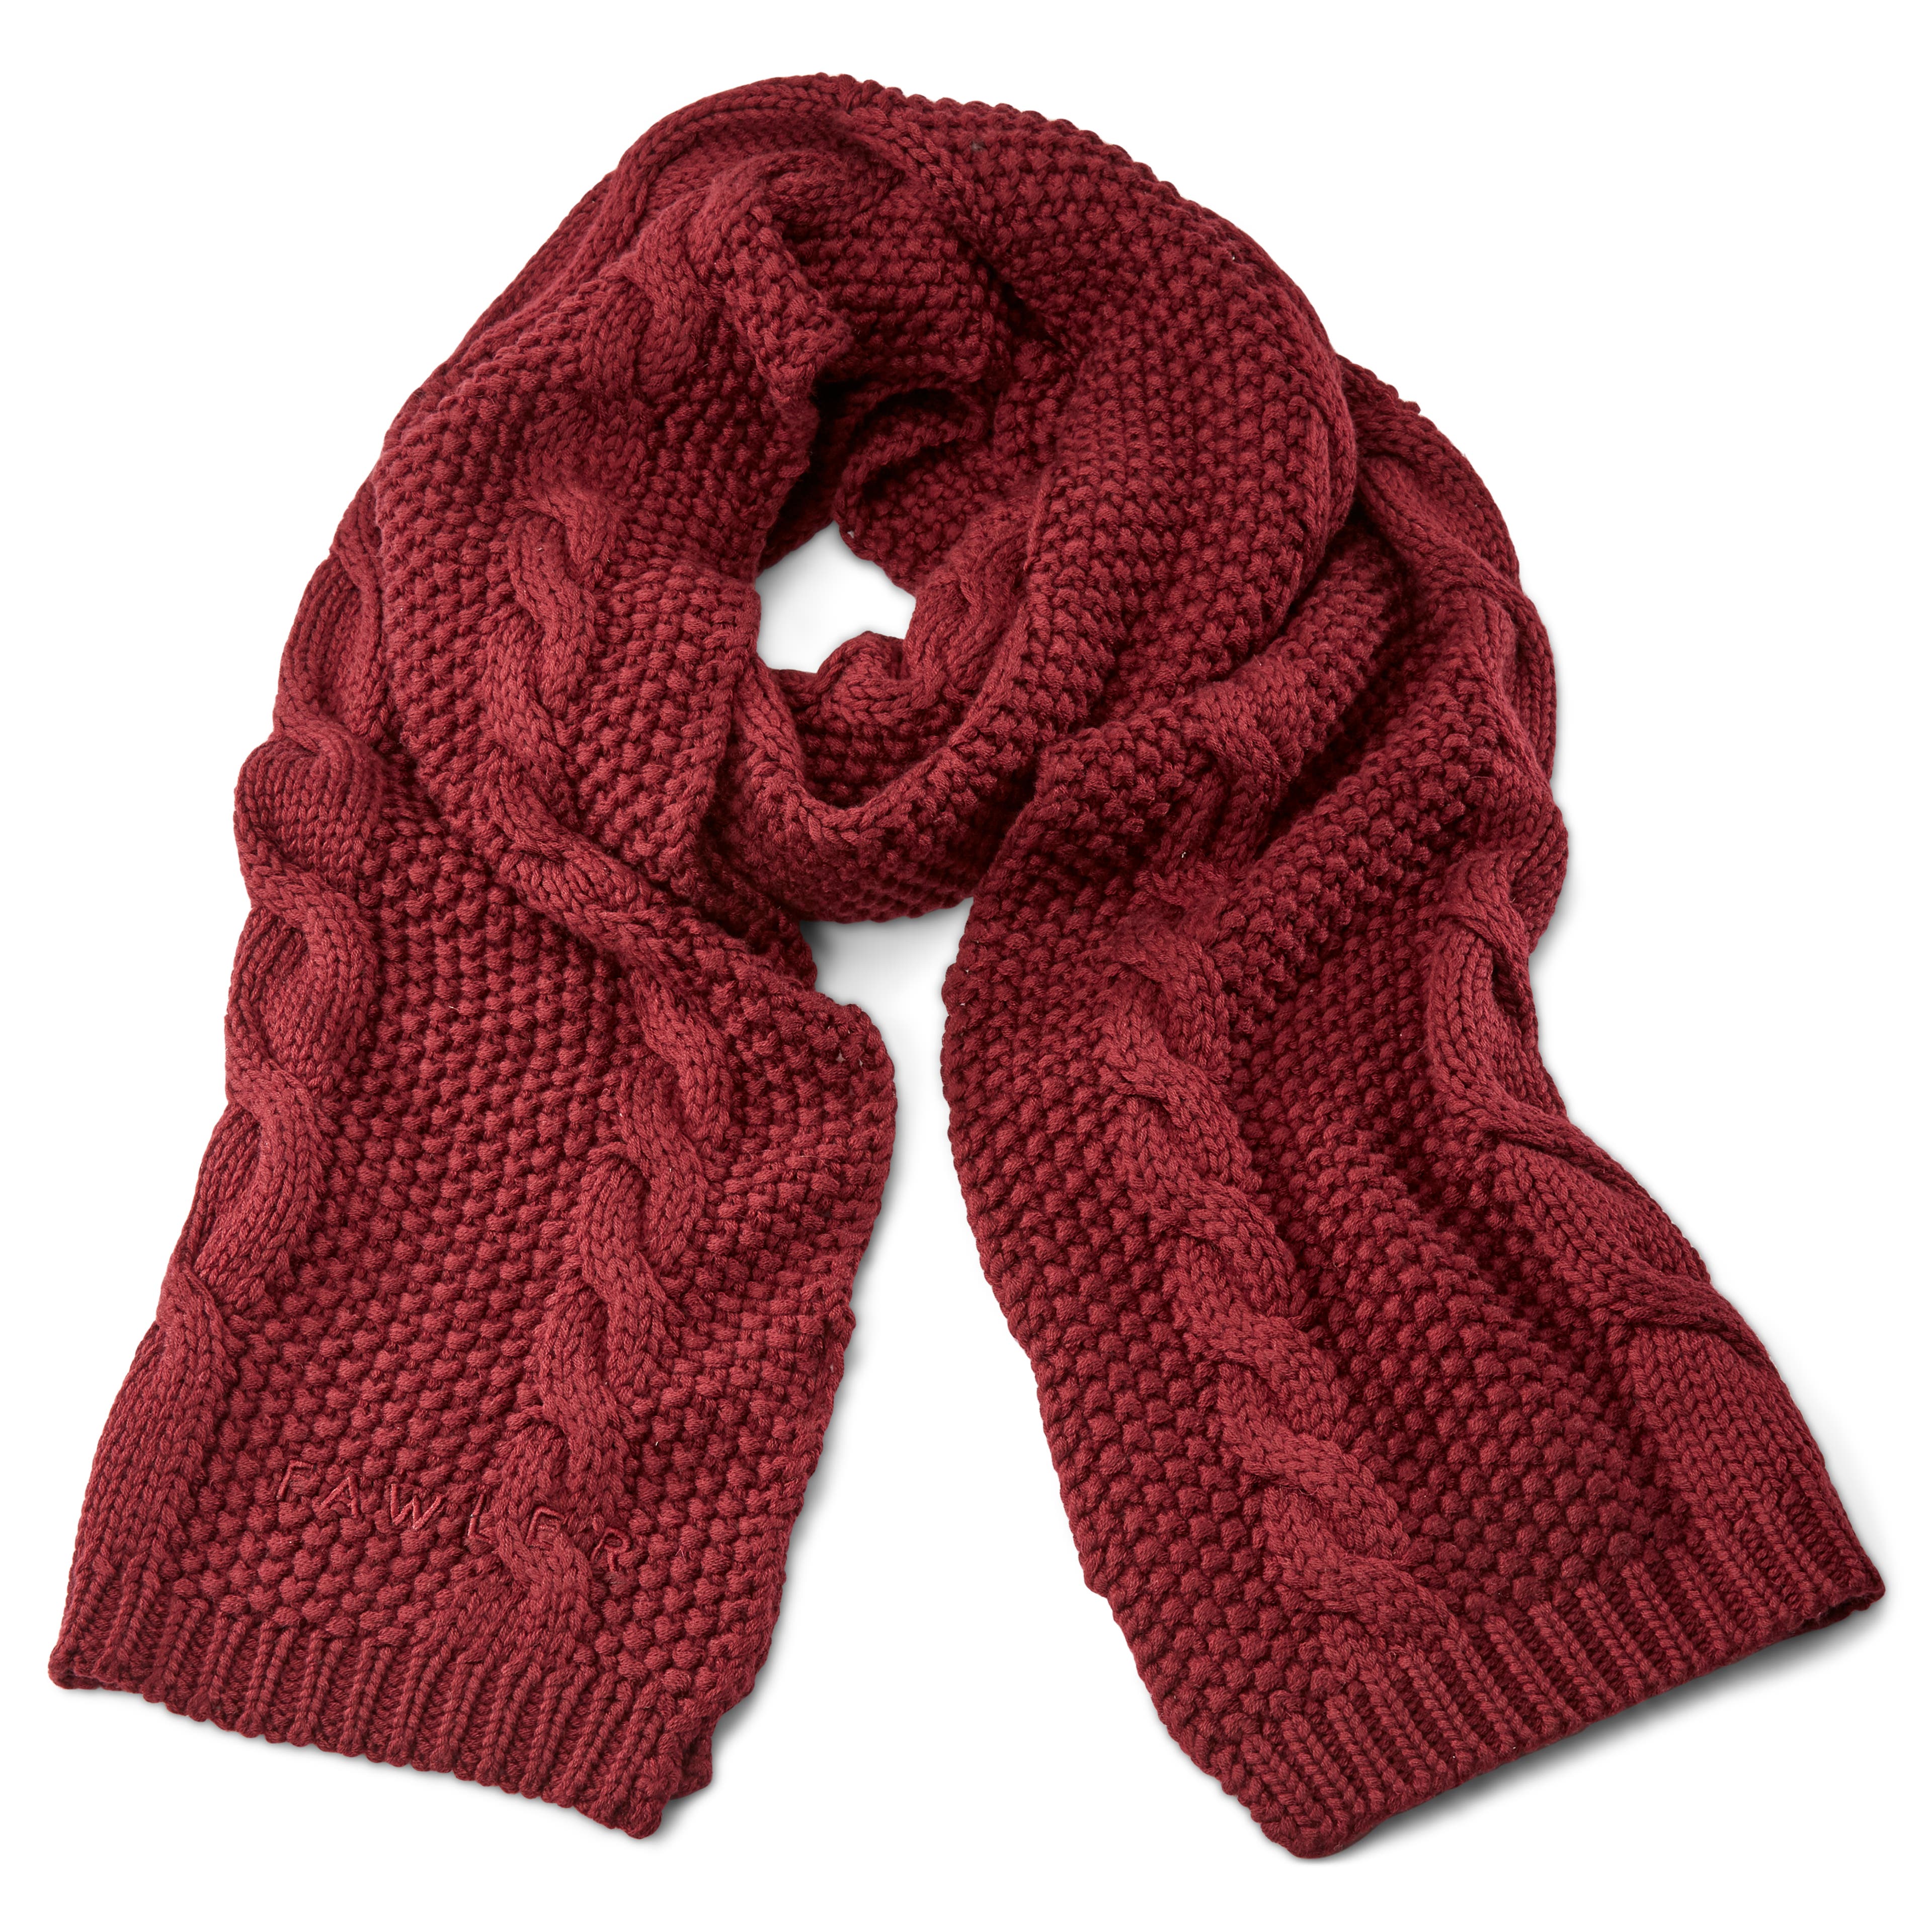 Red Merino Wool Mix Cable Knitted Scarf